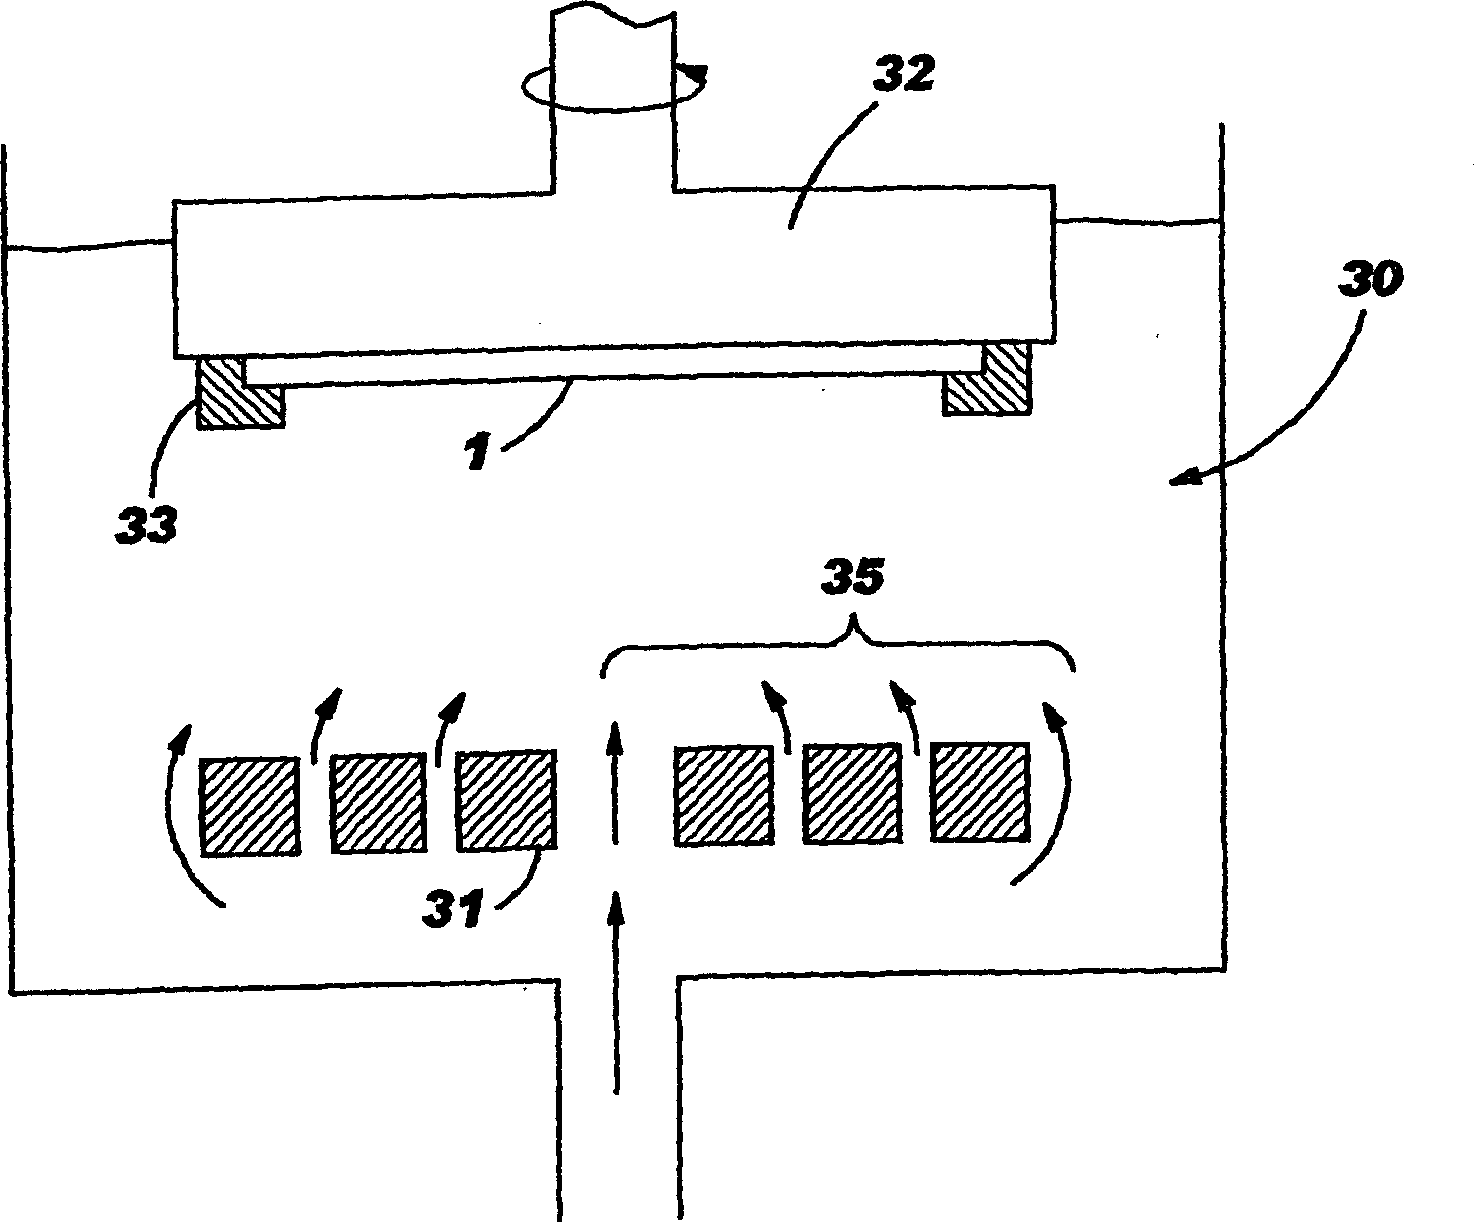 Integrated plating and planarization process and apparatus therefor